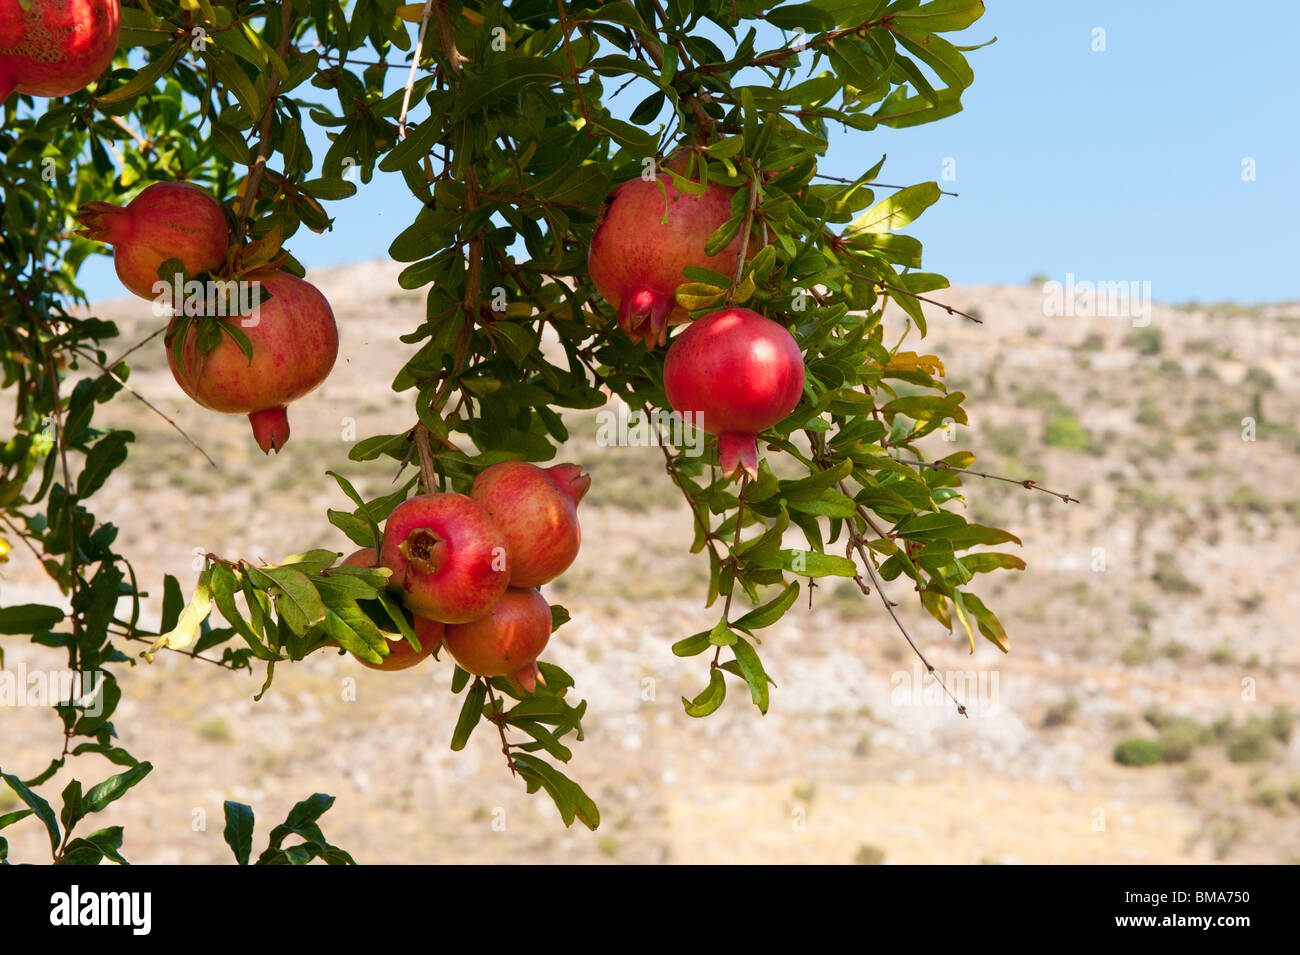 almost ripe pomegranate fruit hanging in the tree Stock Photo